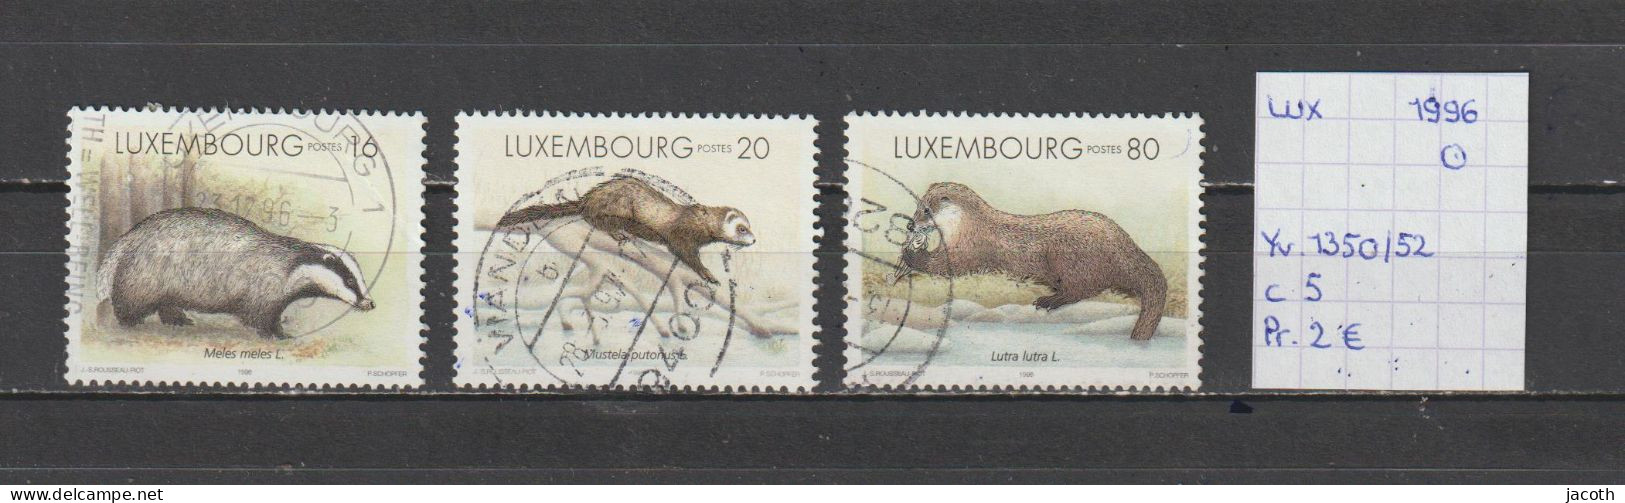 (TJ) Luxembourg 1996 - YT 1350/52 (gest./obl./used) - Used Stamps